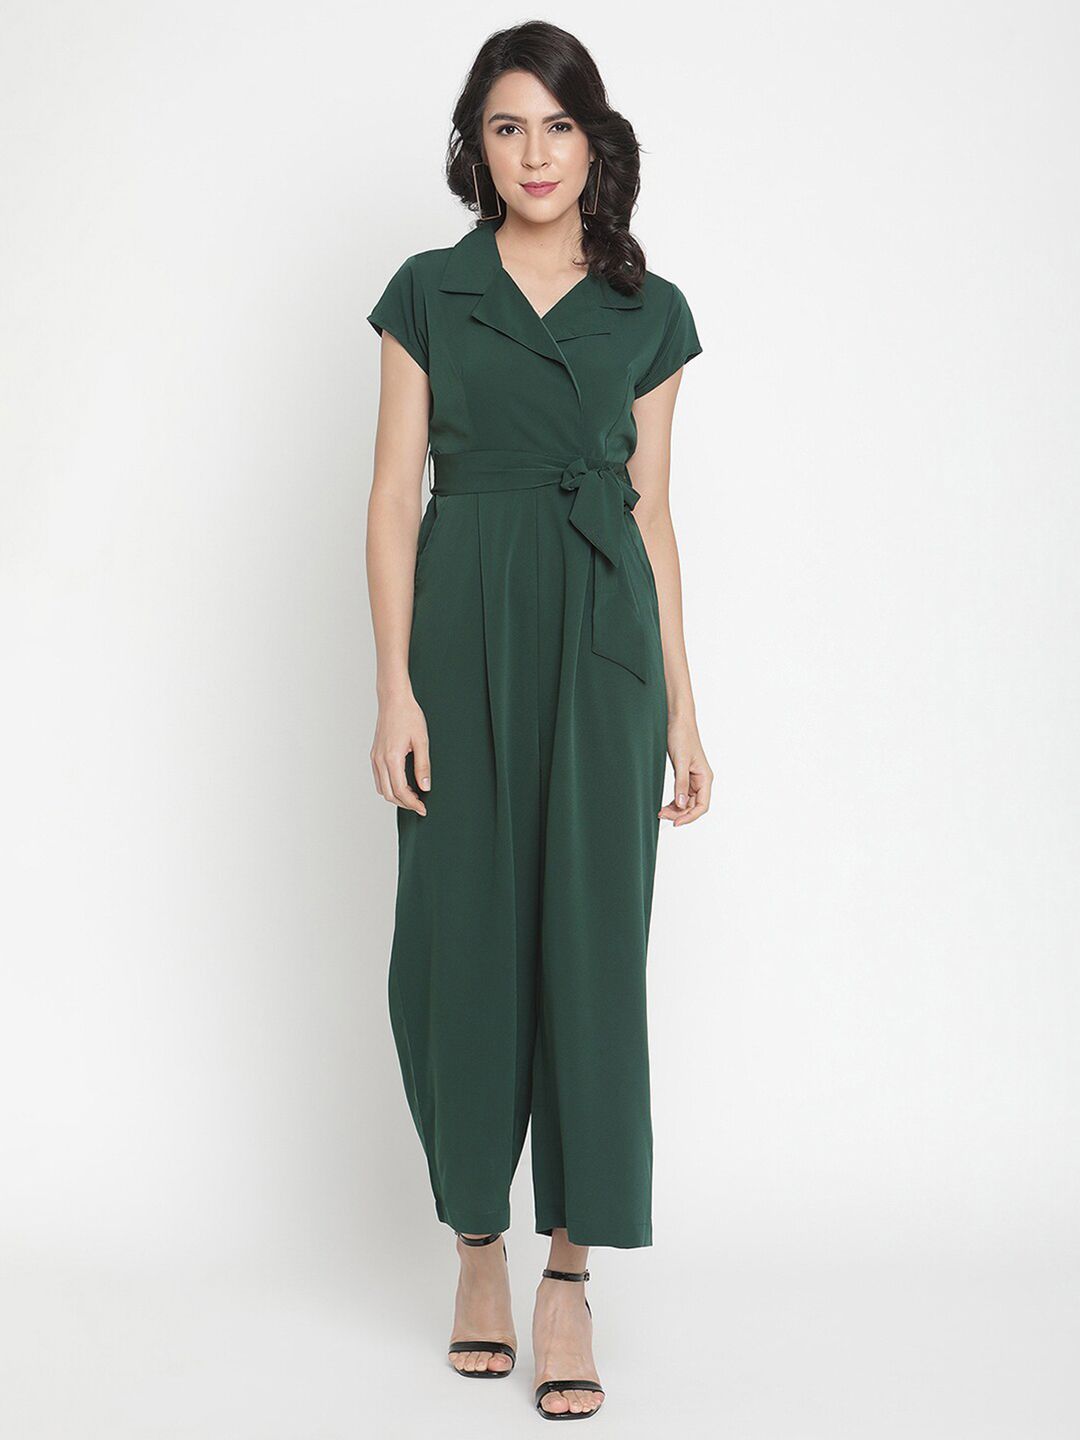 THREAD MUSTER Green Basic Jumpsuit Price in India